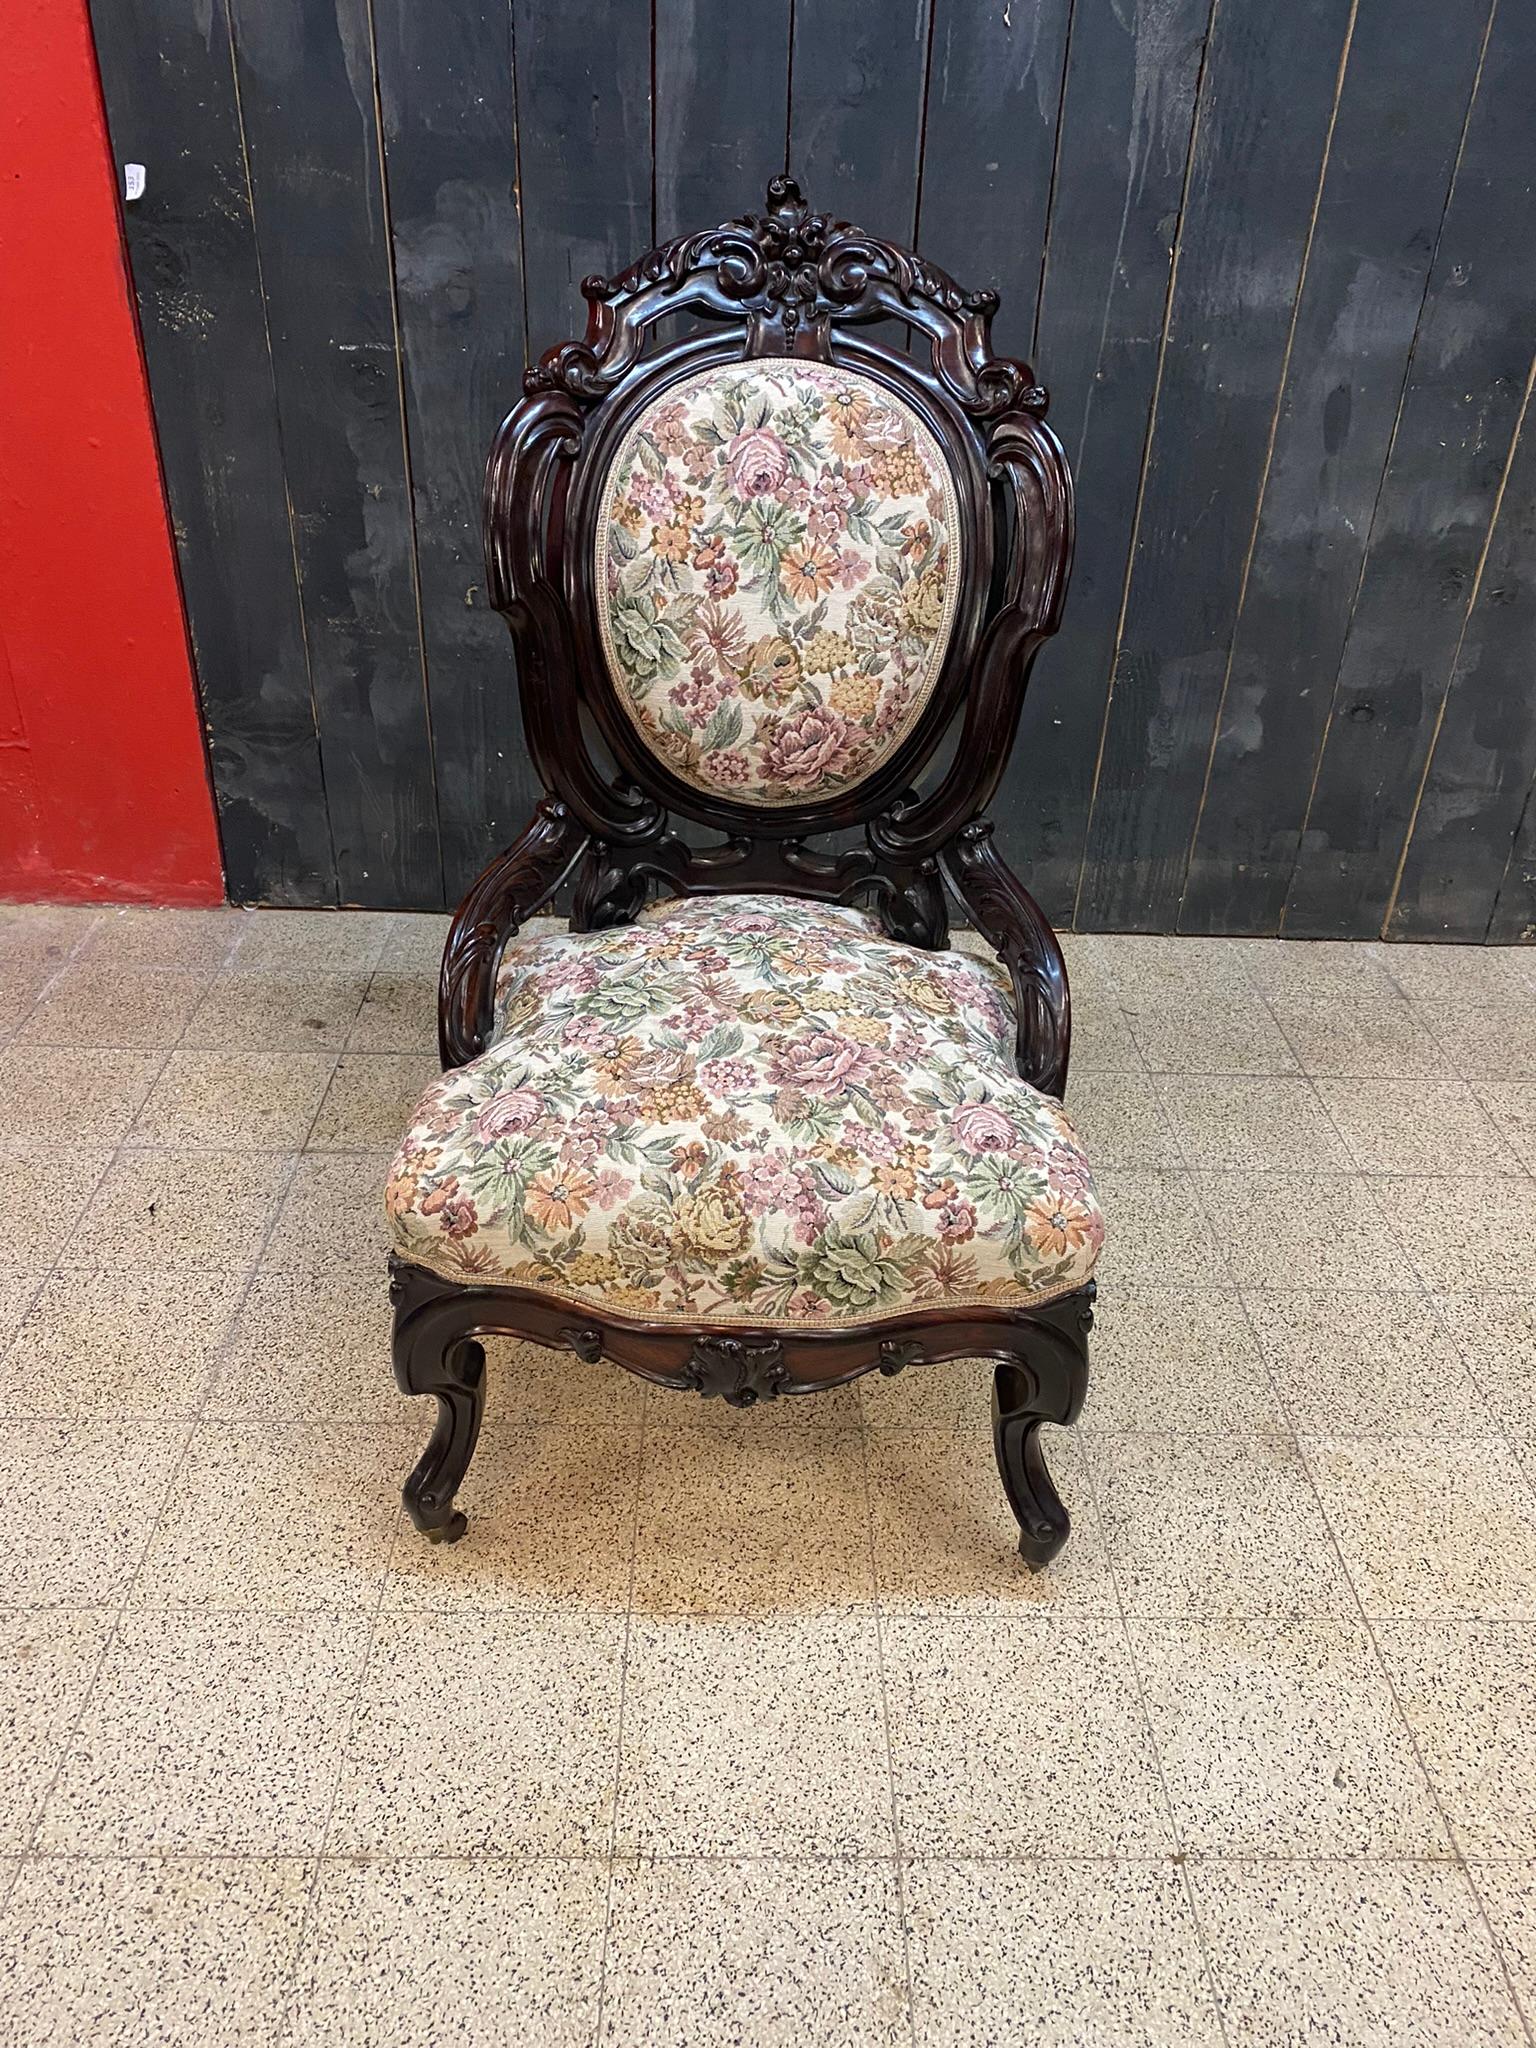 Napoleon III period fireside chair, fully restored
this chair has been recently restored.
if the fabric does not please there is just the fabric to change, the upholstery is in very good condition.